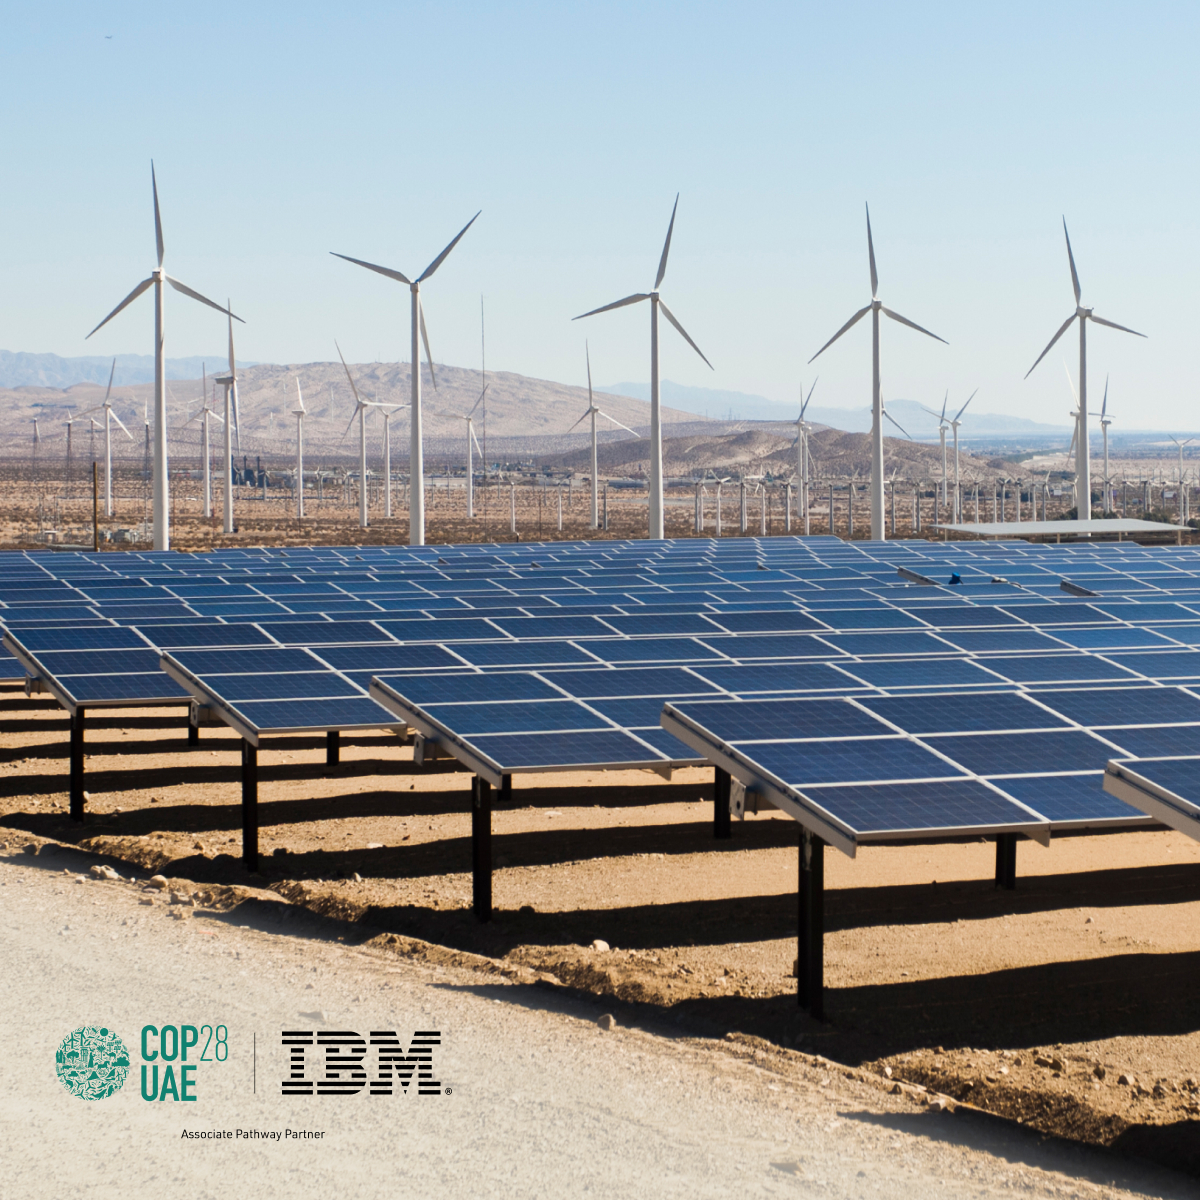 Today IBM announces its role as an Associate Pathway Partner sponsor of the 2023 UN Climate Change Conference of Parties, @COP28_UAE: ibm.co/3ZcSS6N